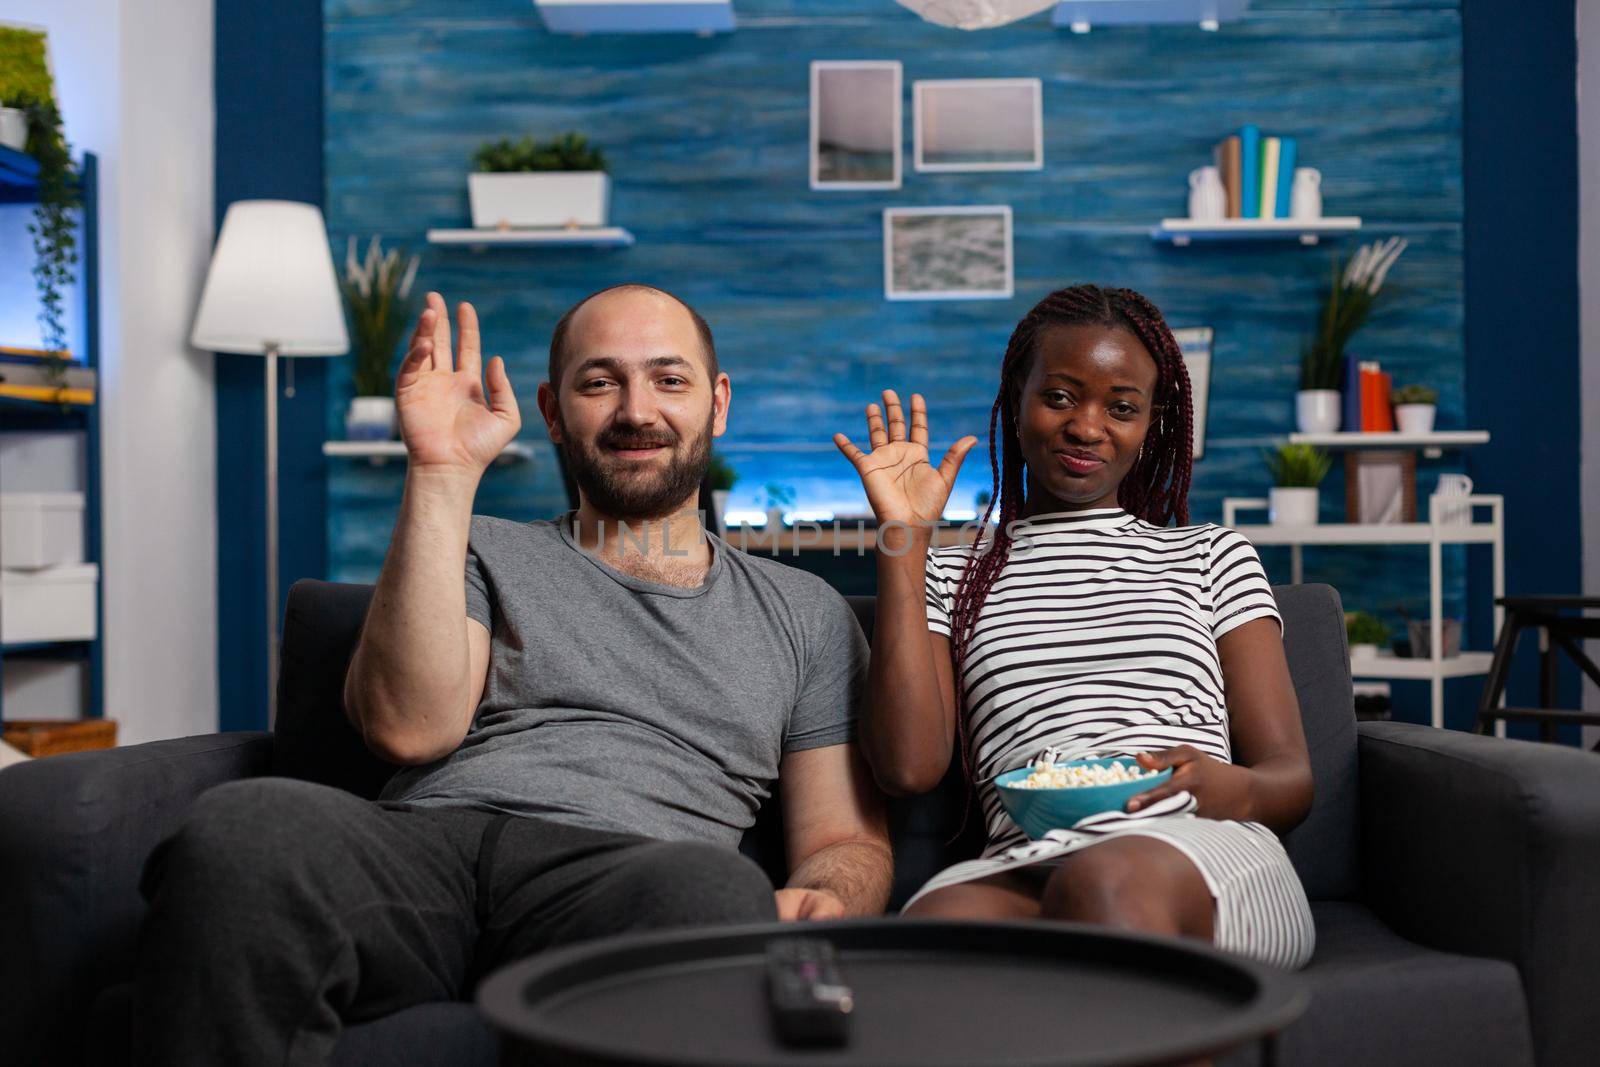 Interracial couple waving at video call camera using technology for online remote communication on internet. Multi ethnic partners talking to friends on video conference at home